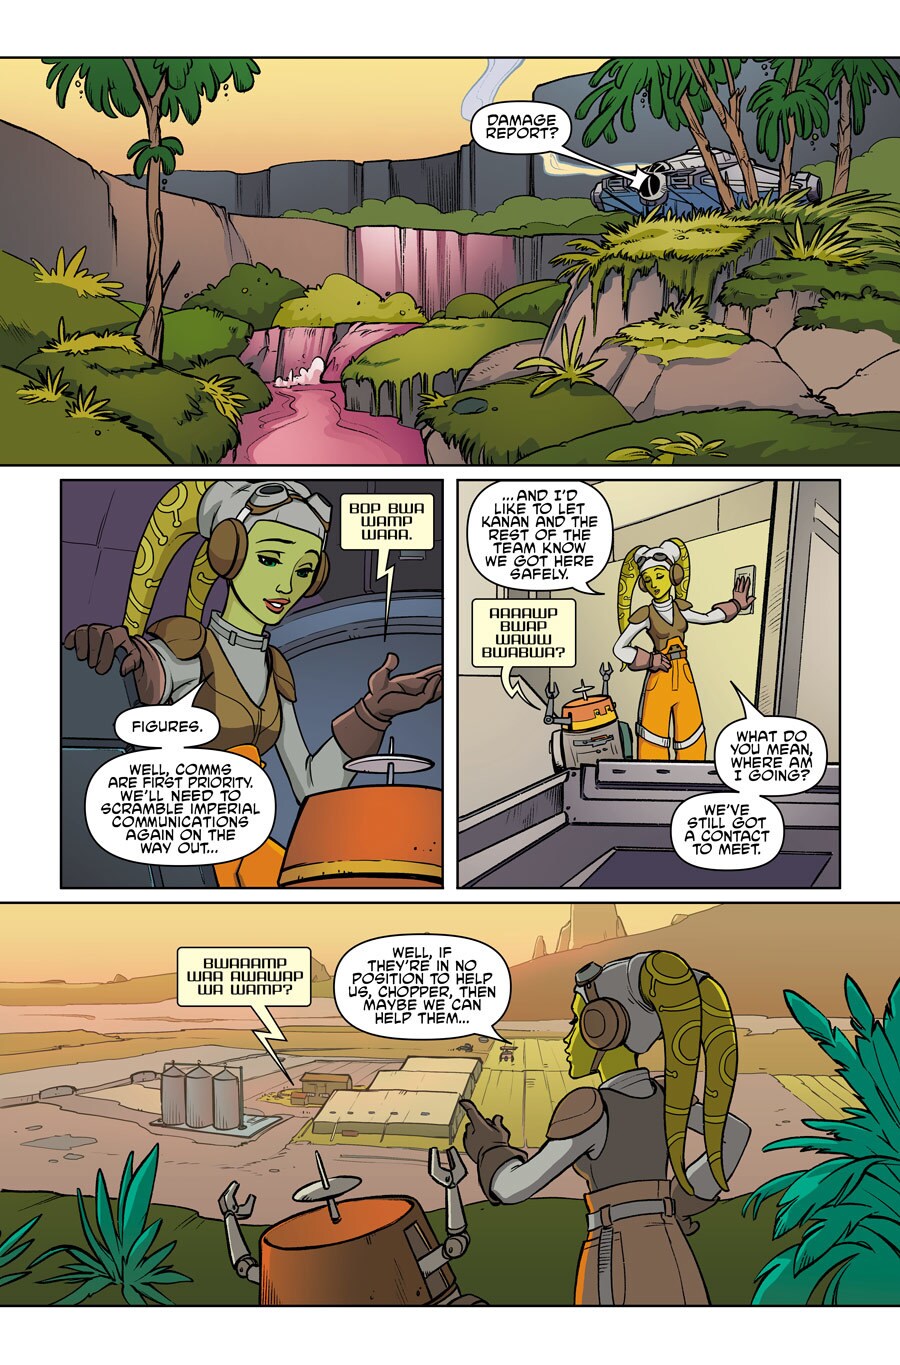 Panels from the comic Star Wars Forces of Destiny: Hera feature Hera and Chopper.